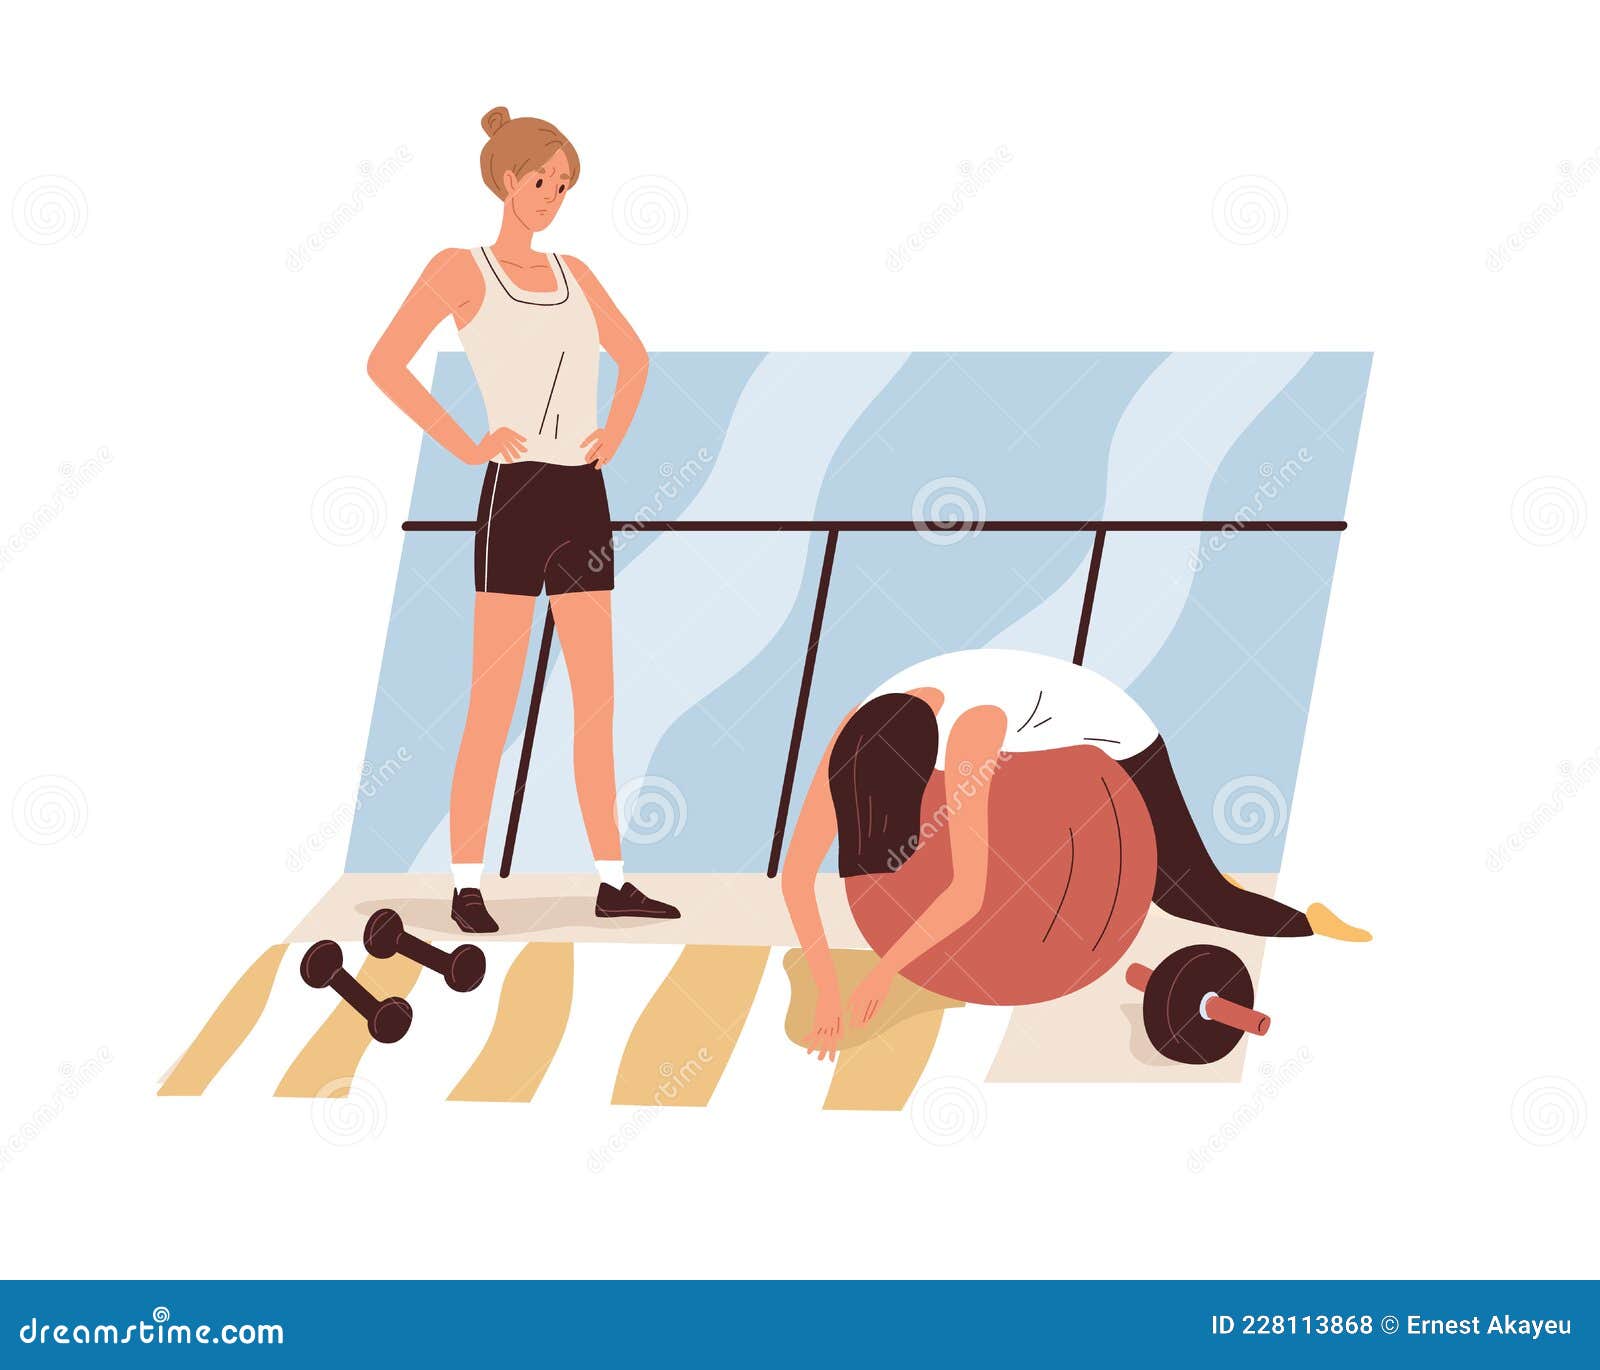 tired exhausted woman during workout in gym. weak lazy apathetic person feeling sick and fatigue at training. physical